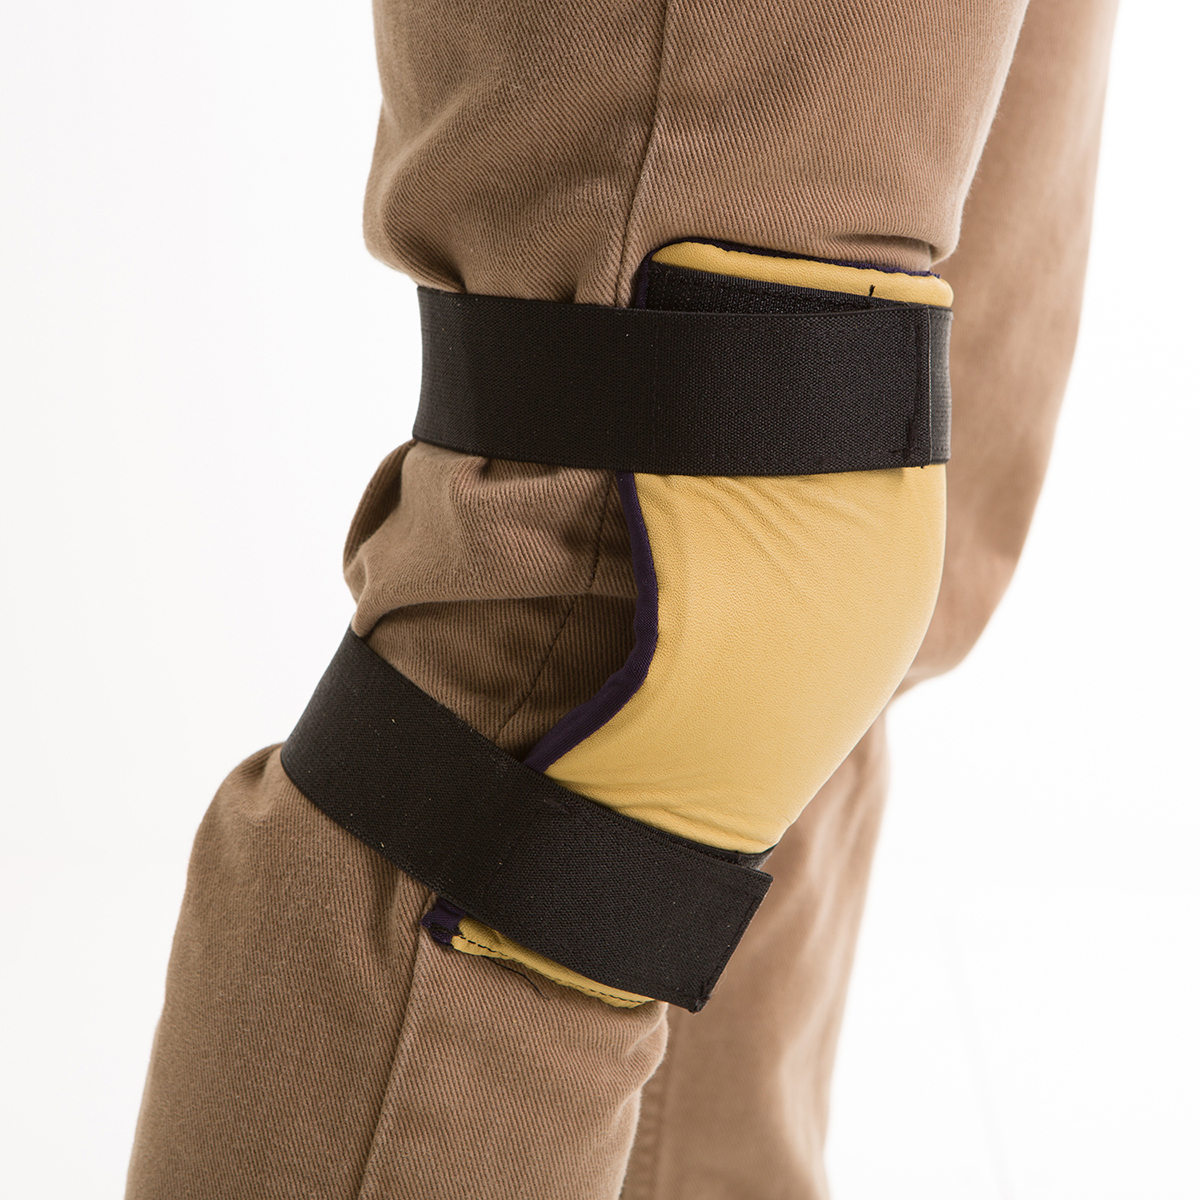 IMPACTO® Beige Nylon Lycra Soft Padded Knee Pad With Visco-Elastic Polymer Foam Padding And Grain Leather Cover